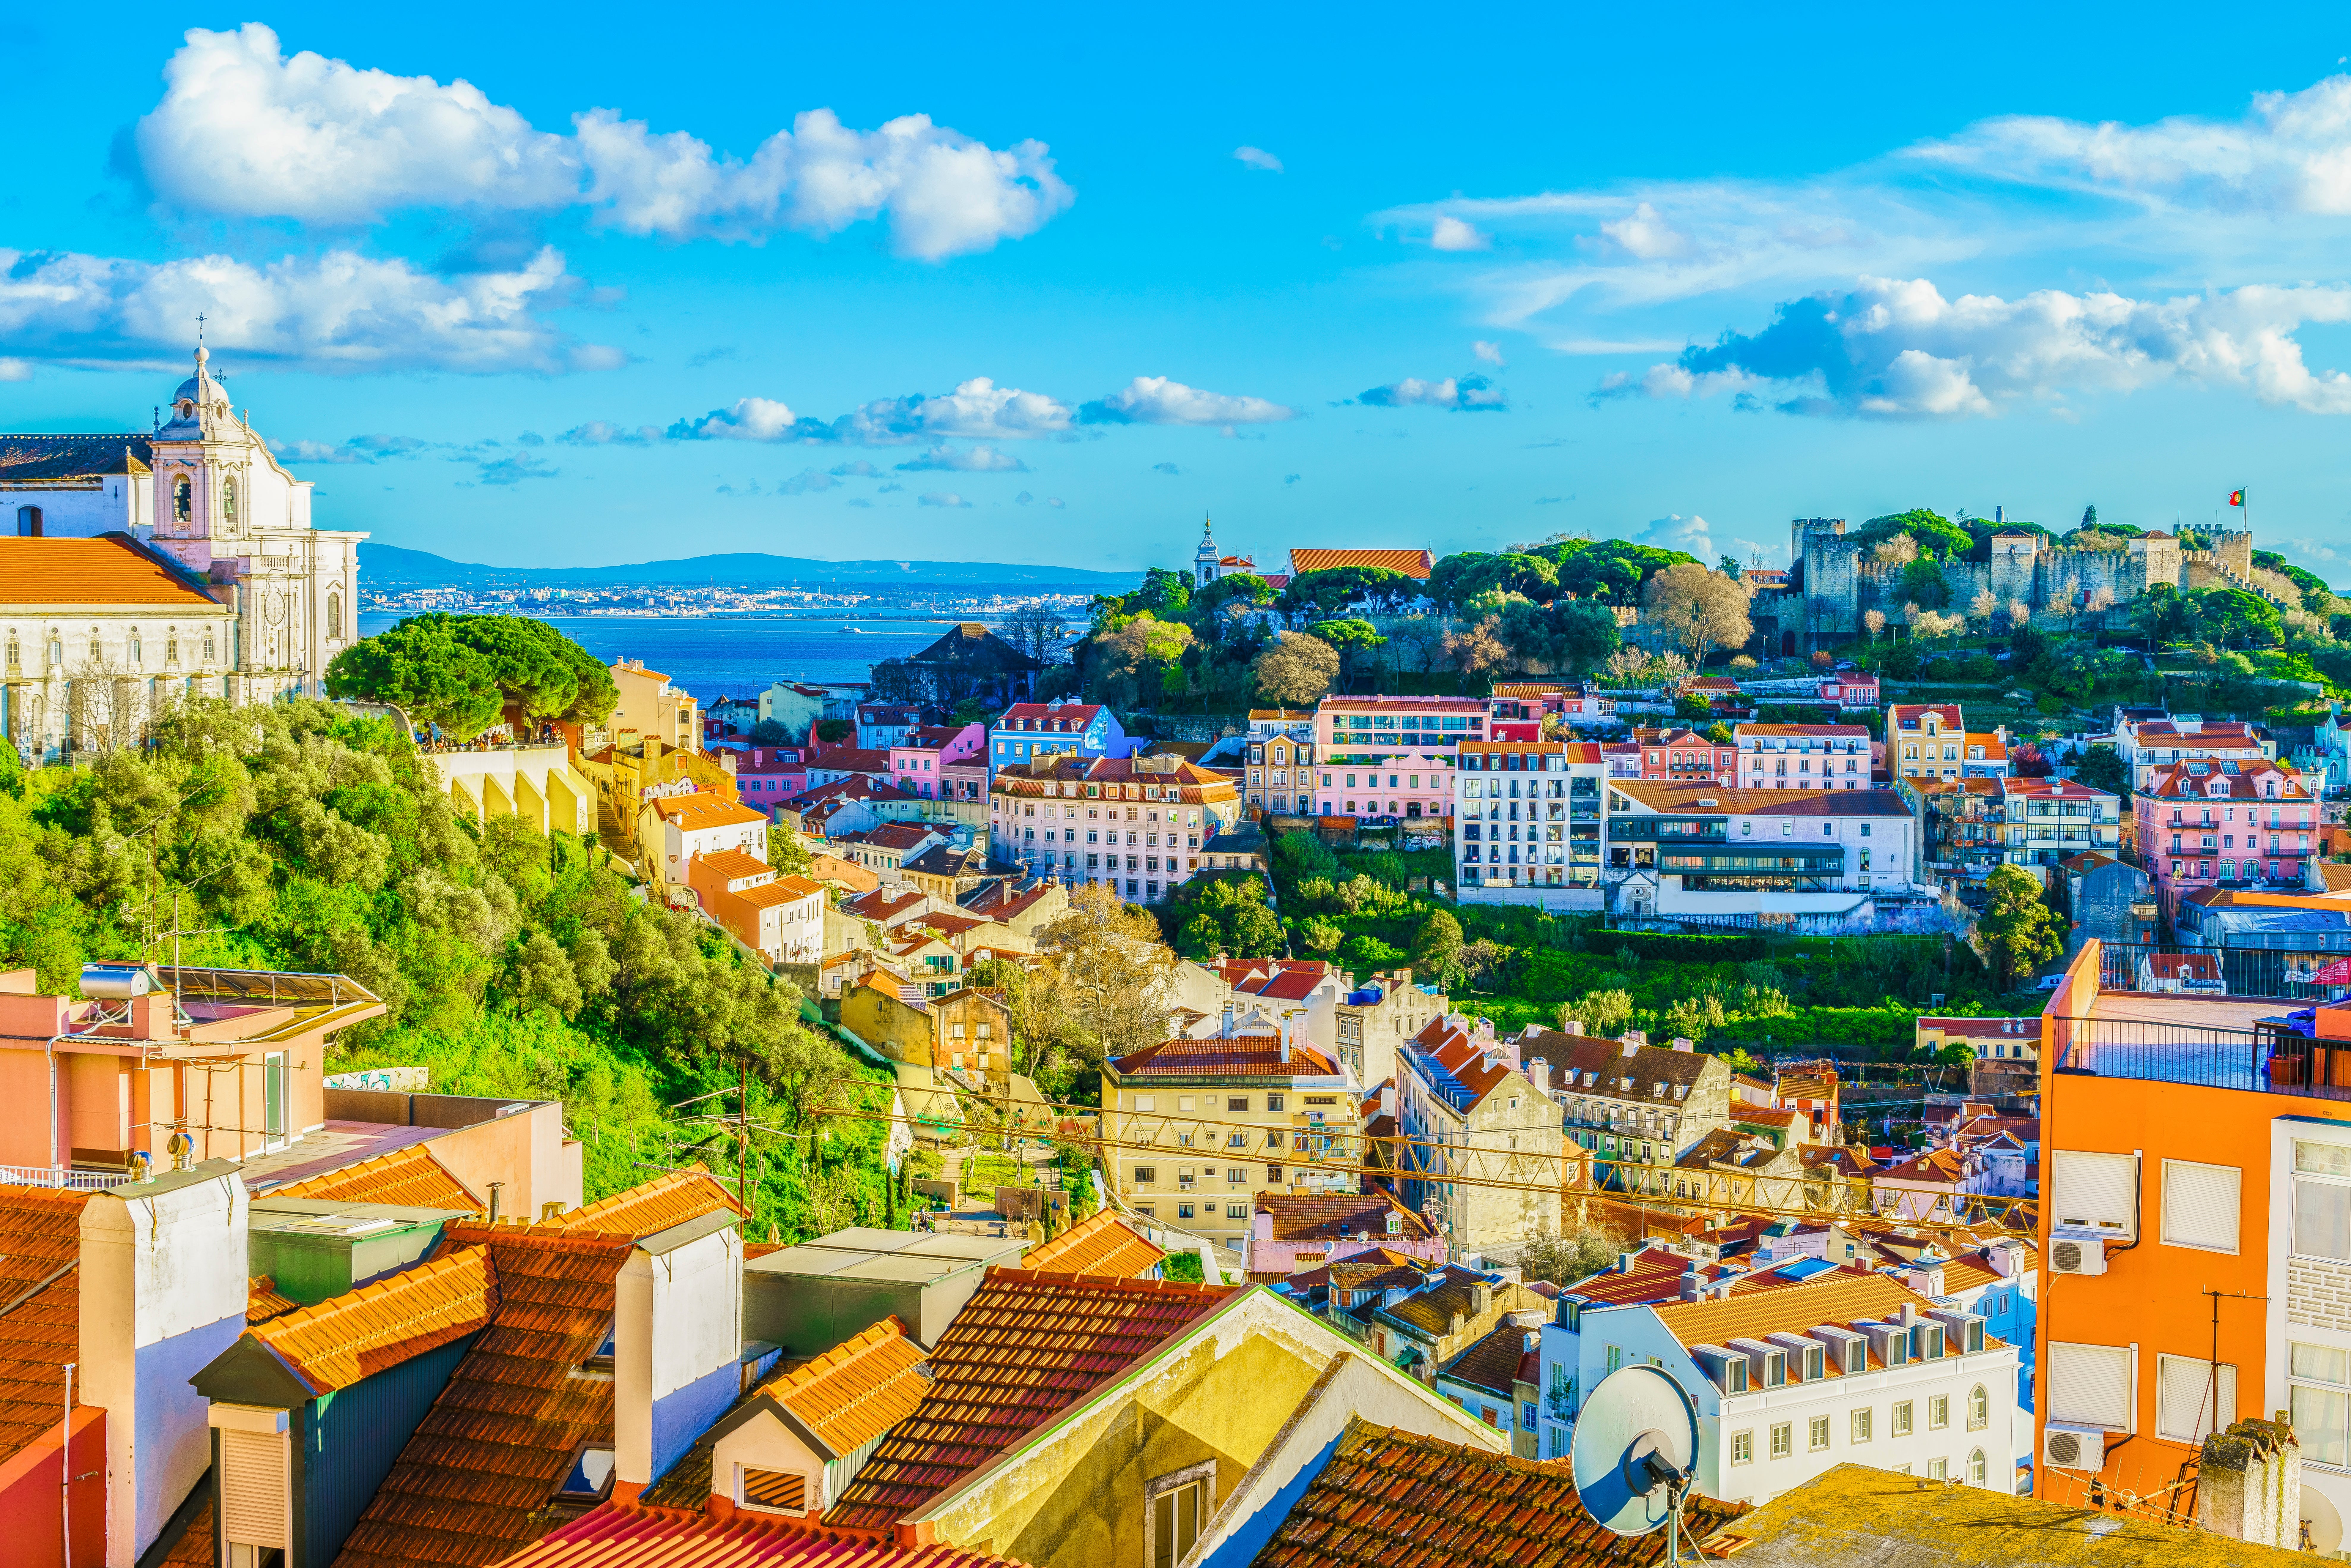 The wonderful Portuguese capital is splendidly connected to the UK